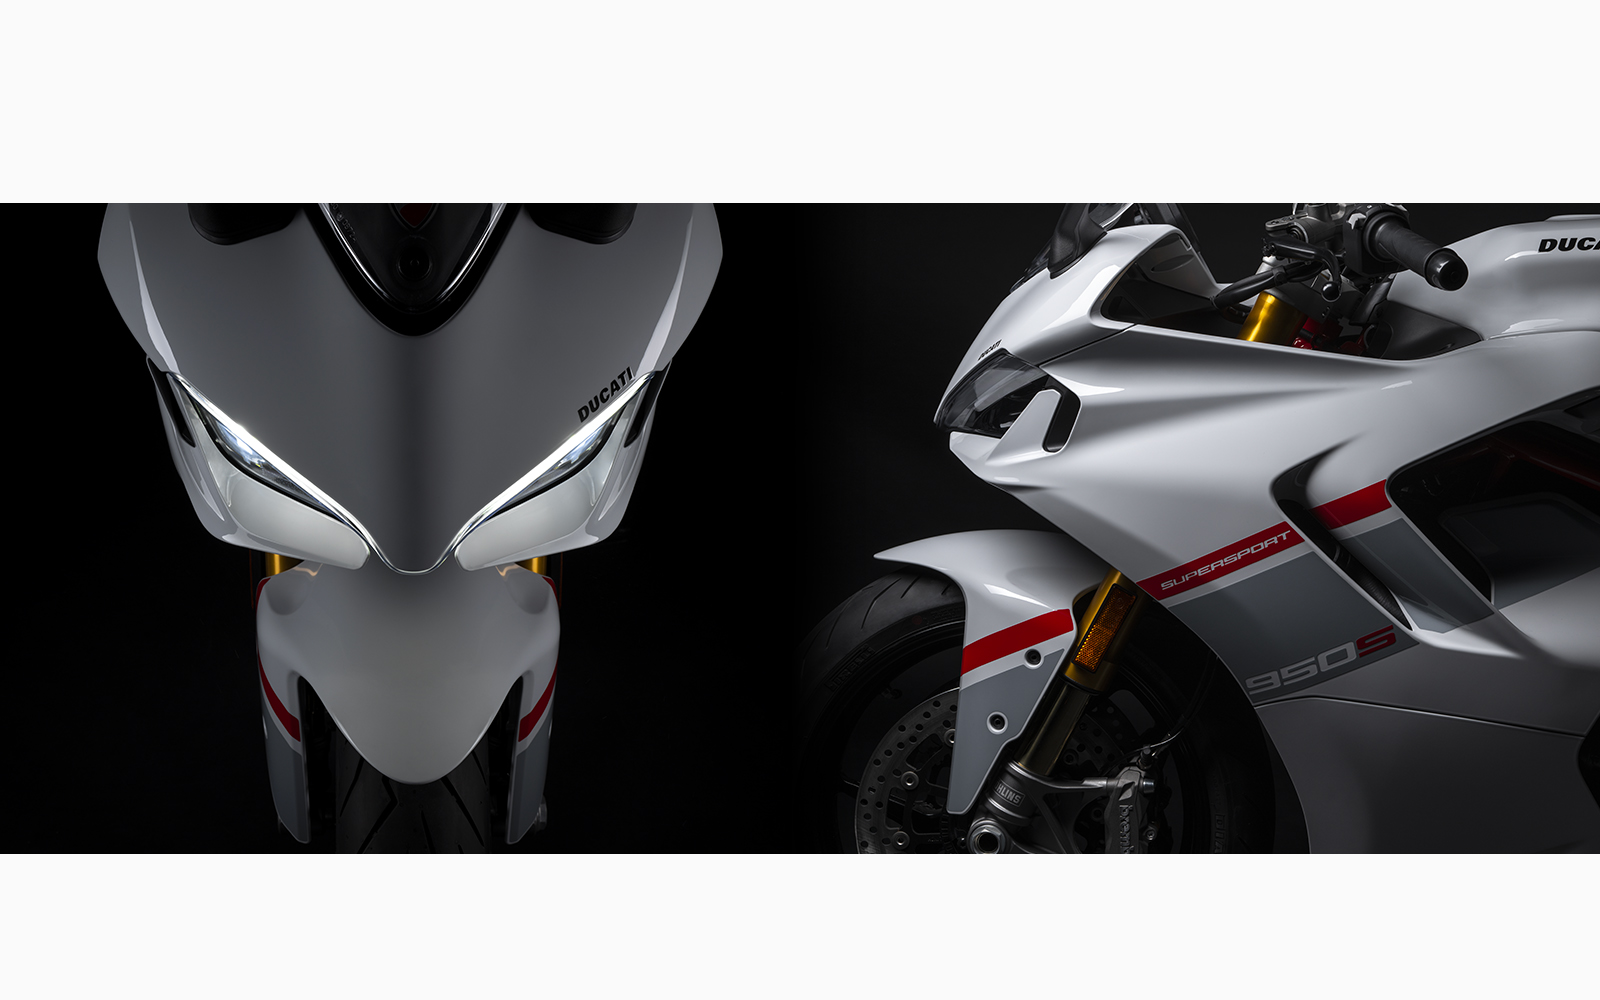 SuperSport 950: your way to sport